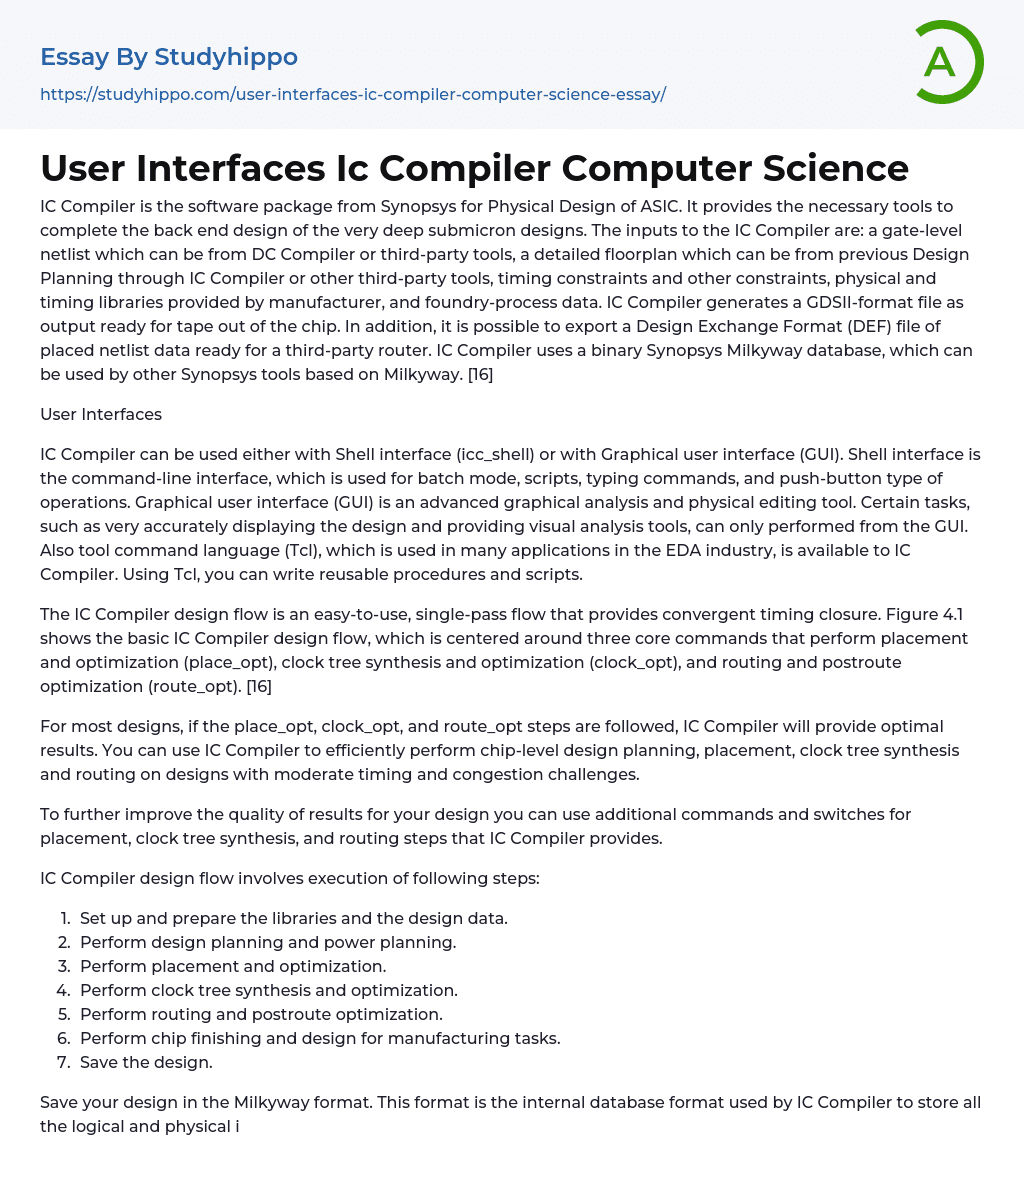 umich computer science essay